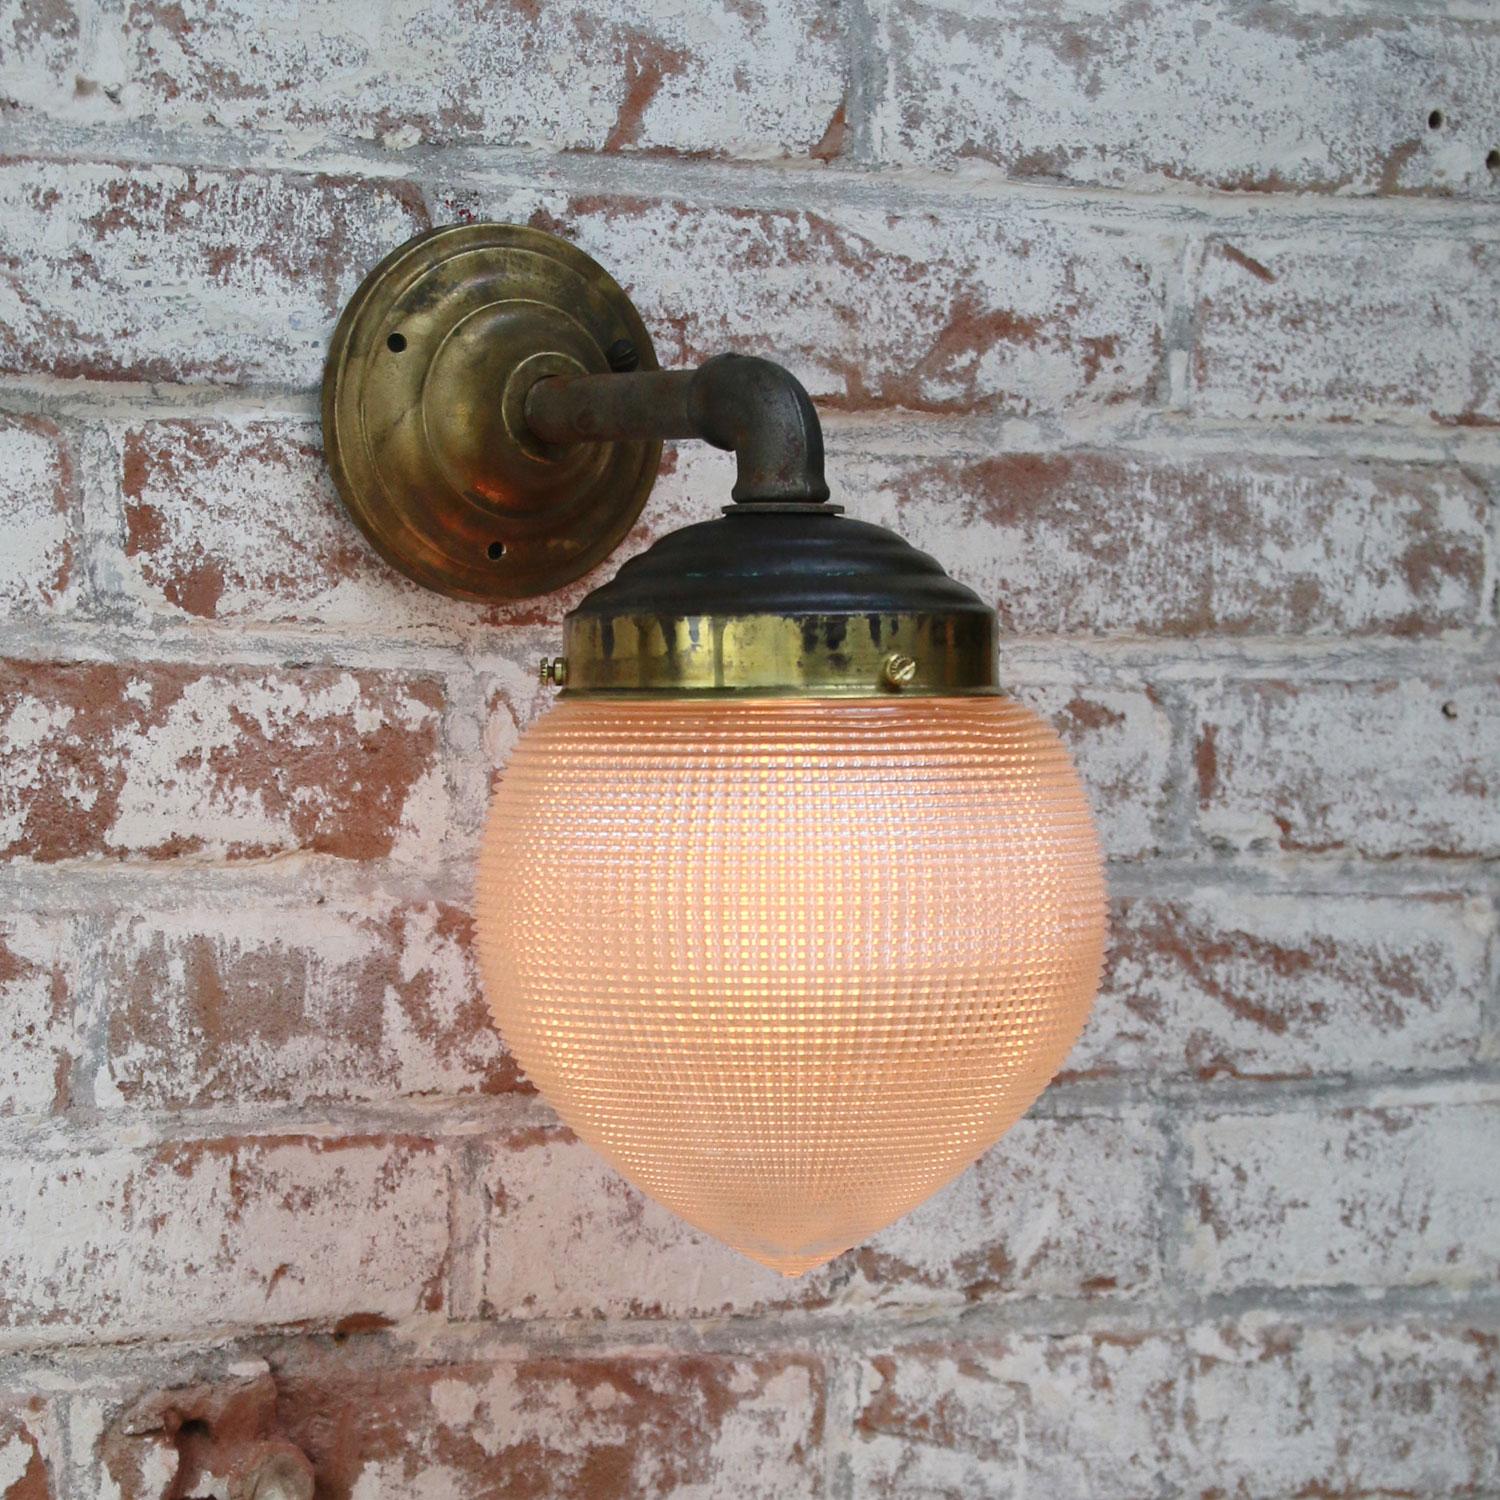 Dentist wall lamp or scone ± 1920
Brass and cast iron arm
Frosted ribbed glass

Measures: Diameter wall mount 10 cm

Weight: 1.80 kg / 4 lb

Priced per individual item. All lamps have been made suitable by international standards for